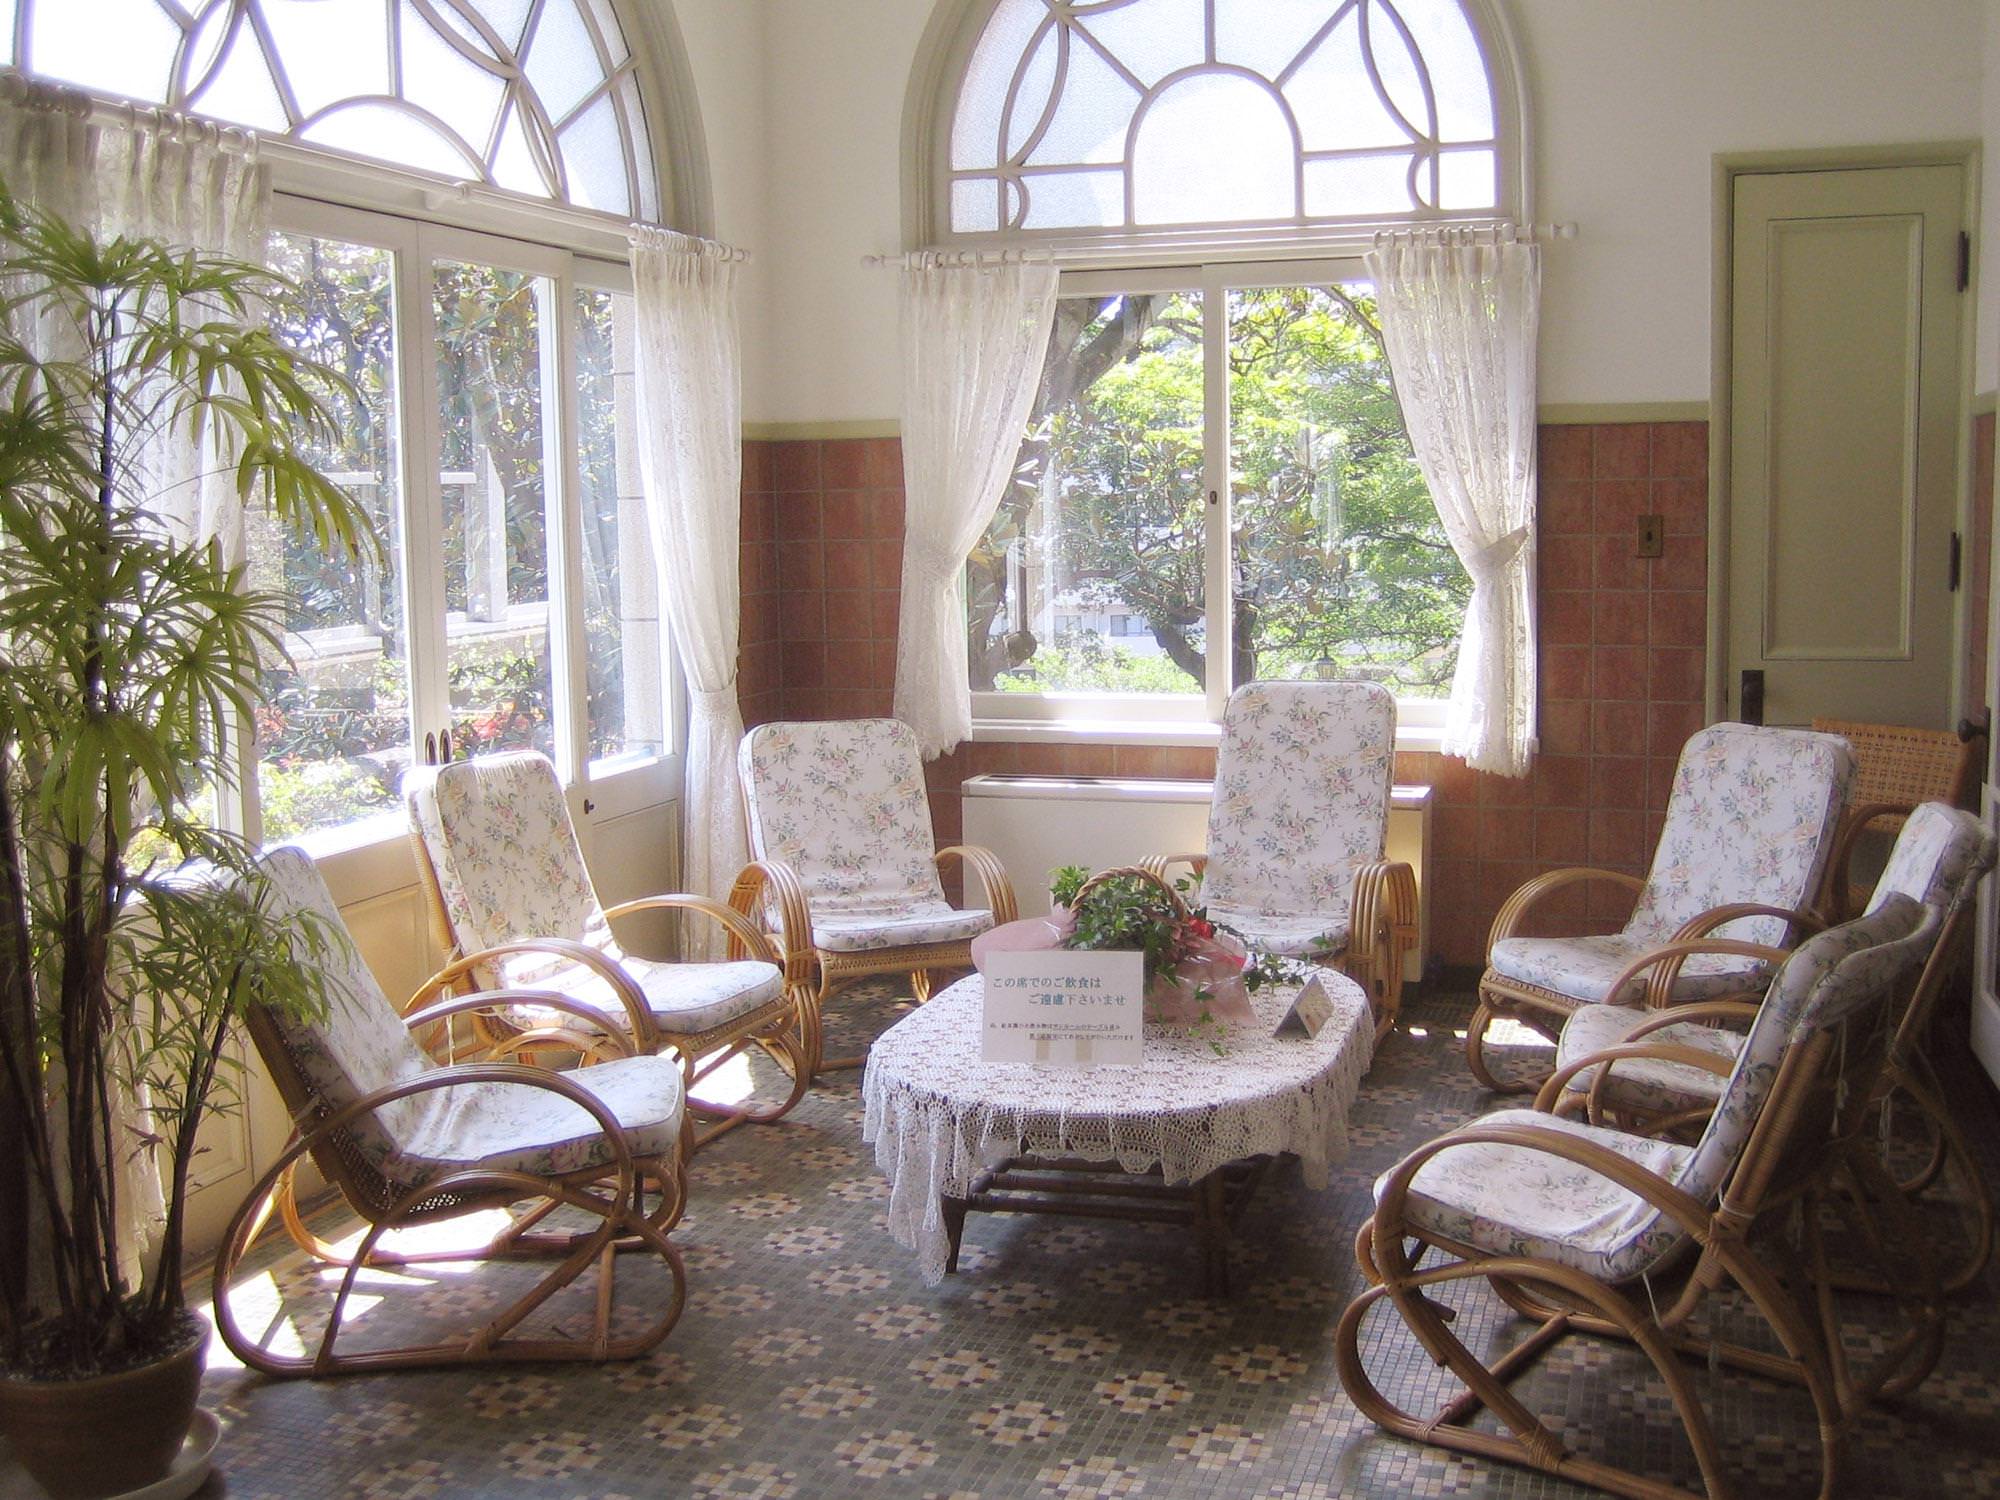 Image of: Decorating Sunroom Images